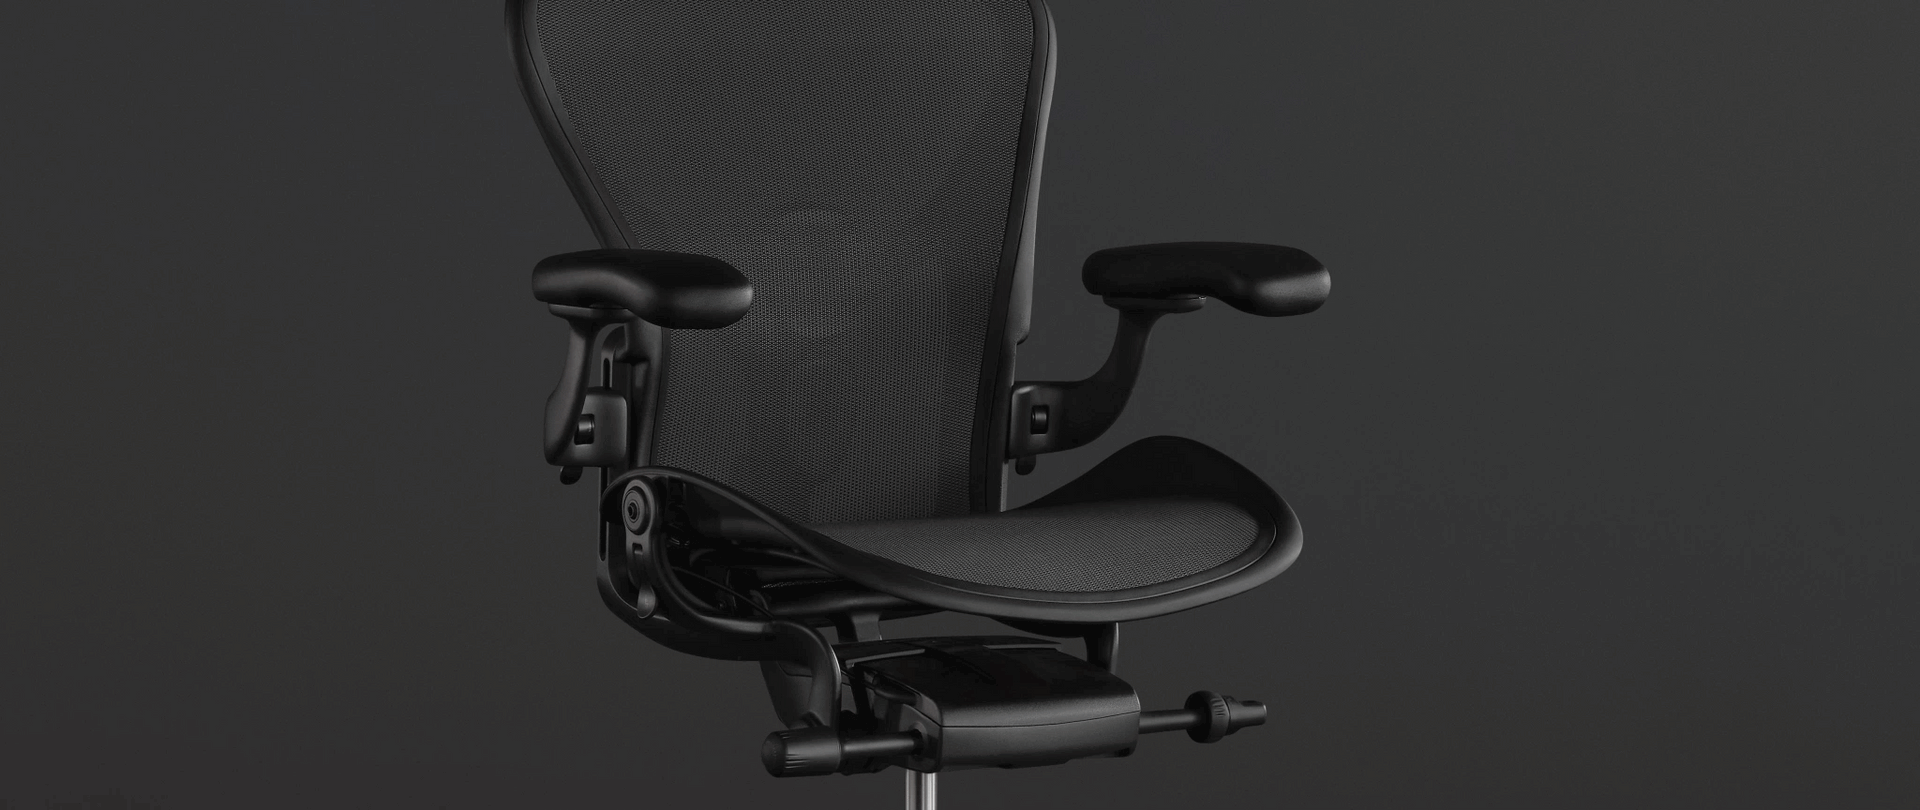 An animation highlights the PostureFit spinal support on the Embody Gaming Chair; the animation is overlaid on a photo of the chair on a black background.